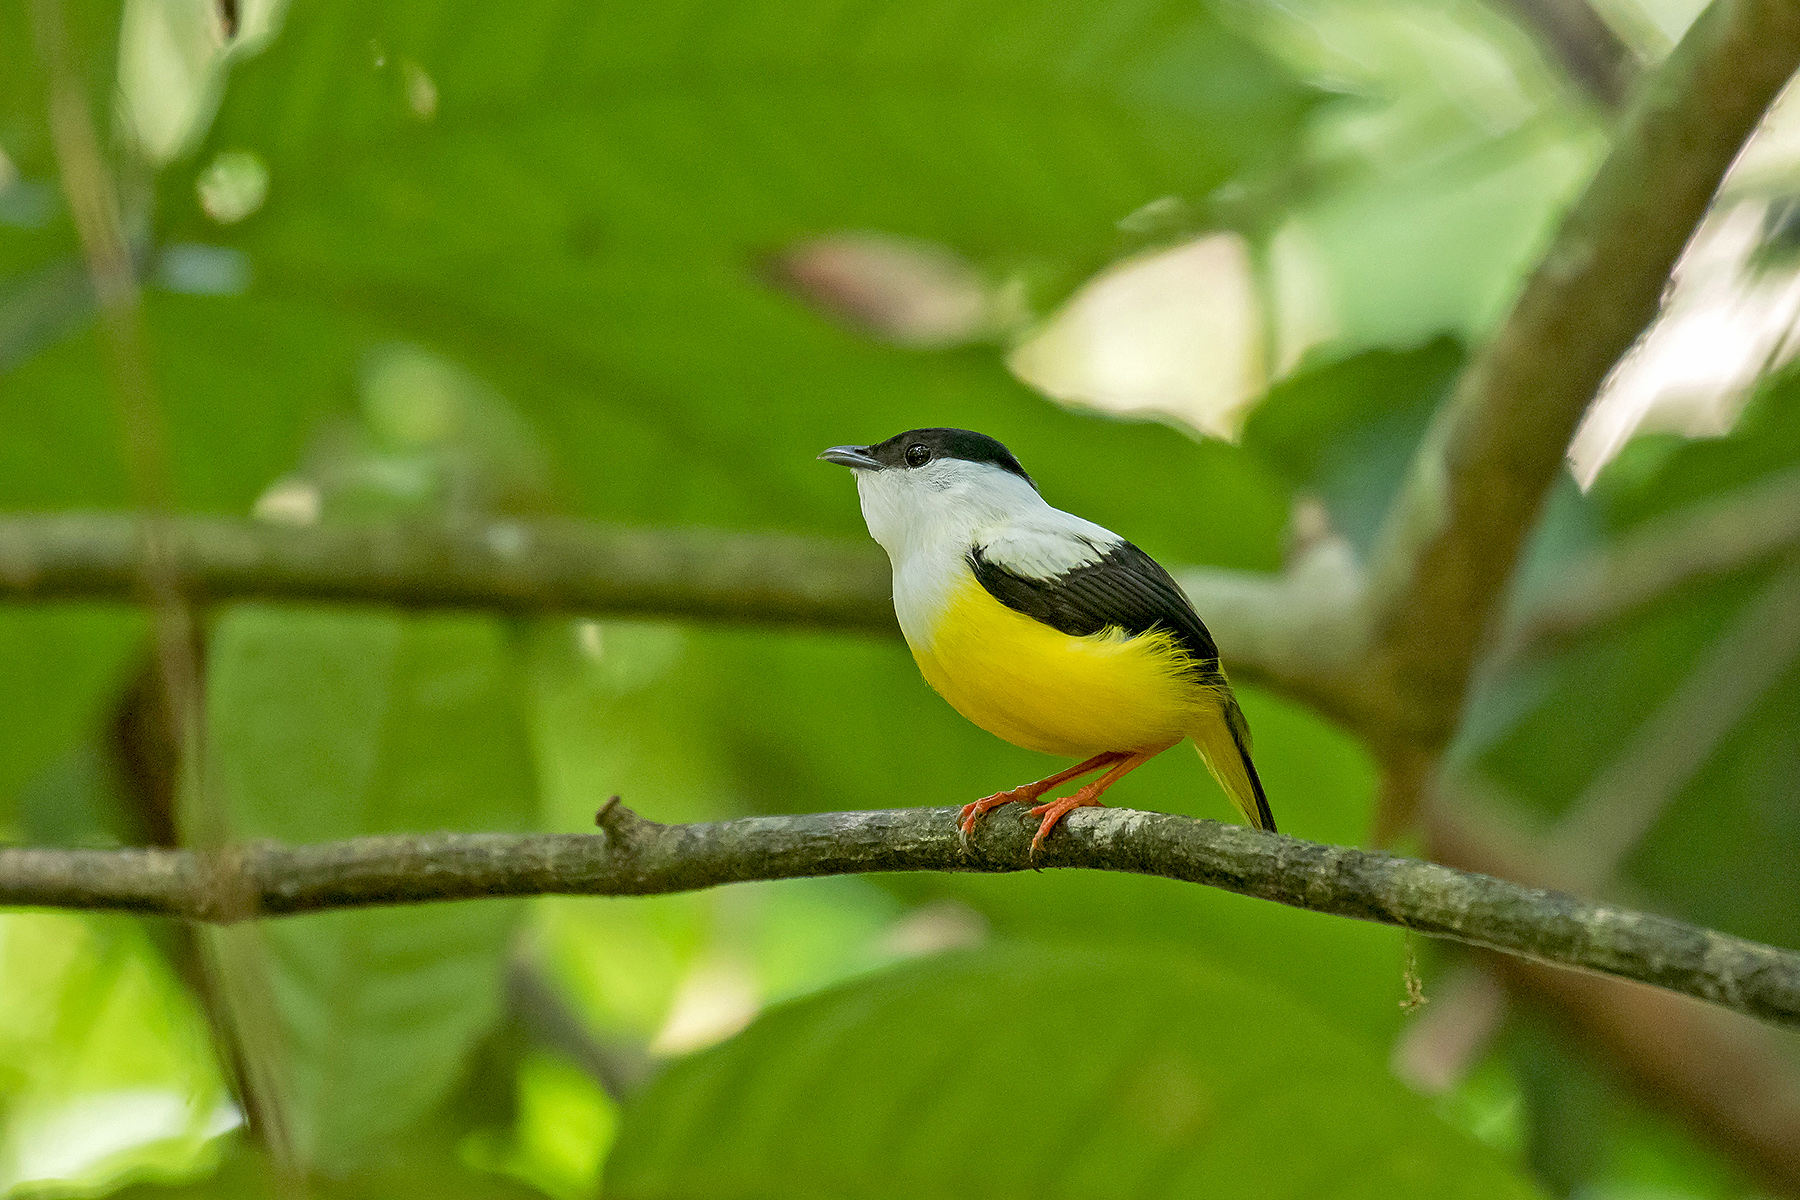 White-collared Manakin on our Costa Rica birding tour (image by Pete Morris)